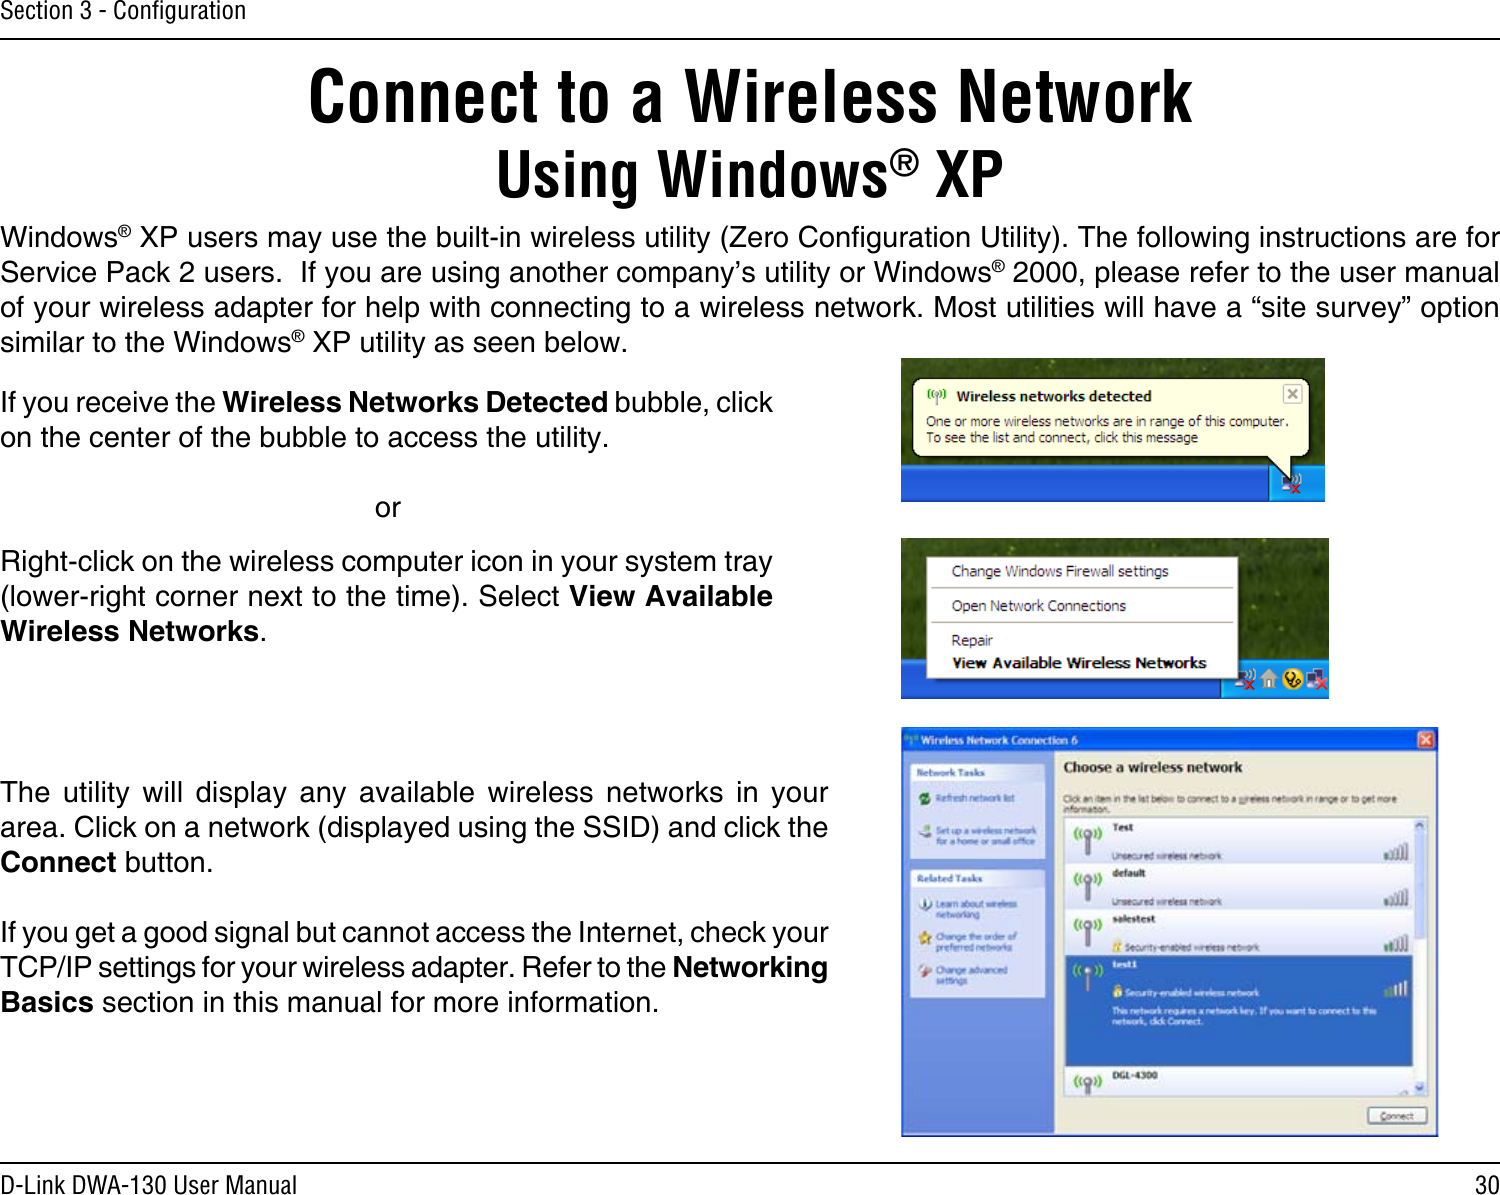 30D-Link DWA-130 User ManualSection 3 - ConﬁgurationConnect to a Wireless NetworkUsing Windows® XPWindows® XP users may use the built-in wireless utility (Zero Conguration Utility). The following instructions are for Service Pack 2 users.  If you are using another company’s utility or Windows® 2000, please refer to the user manual of your wireless adapter for help with connecting to a wireless network. Most utilities will have a “site survey” option similar to the Windows® XP utility as seen below.Right-click on the wireless computer icon in your system tray (lower-right corner next to the time). Select View Available Wireless Networks.If you receive the Wireless Networks Detected bubble, click on the center of the bubble to access the utility.     orThe  utility  will  display  any  available  wireless  networks  in  your area. Click on a network (displayed using the SSID) and click the Connect button.If you get a good signal but cannot access the Internet, check your TCP/IP settings for your wireless adapter. Refer to the Networking Basics section in this manual for more information.